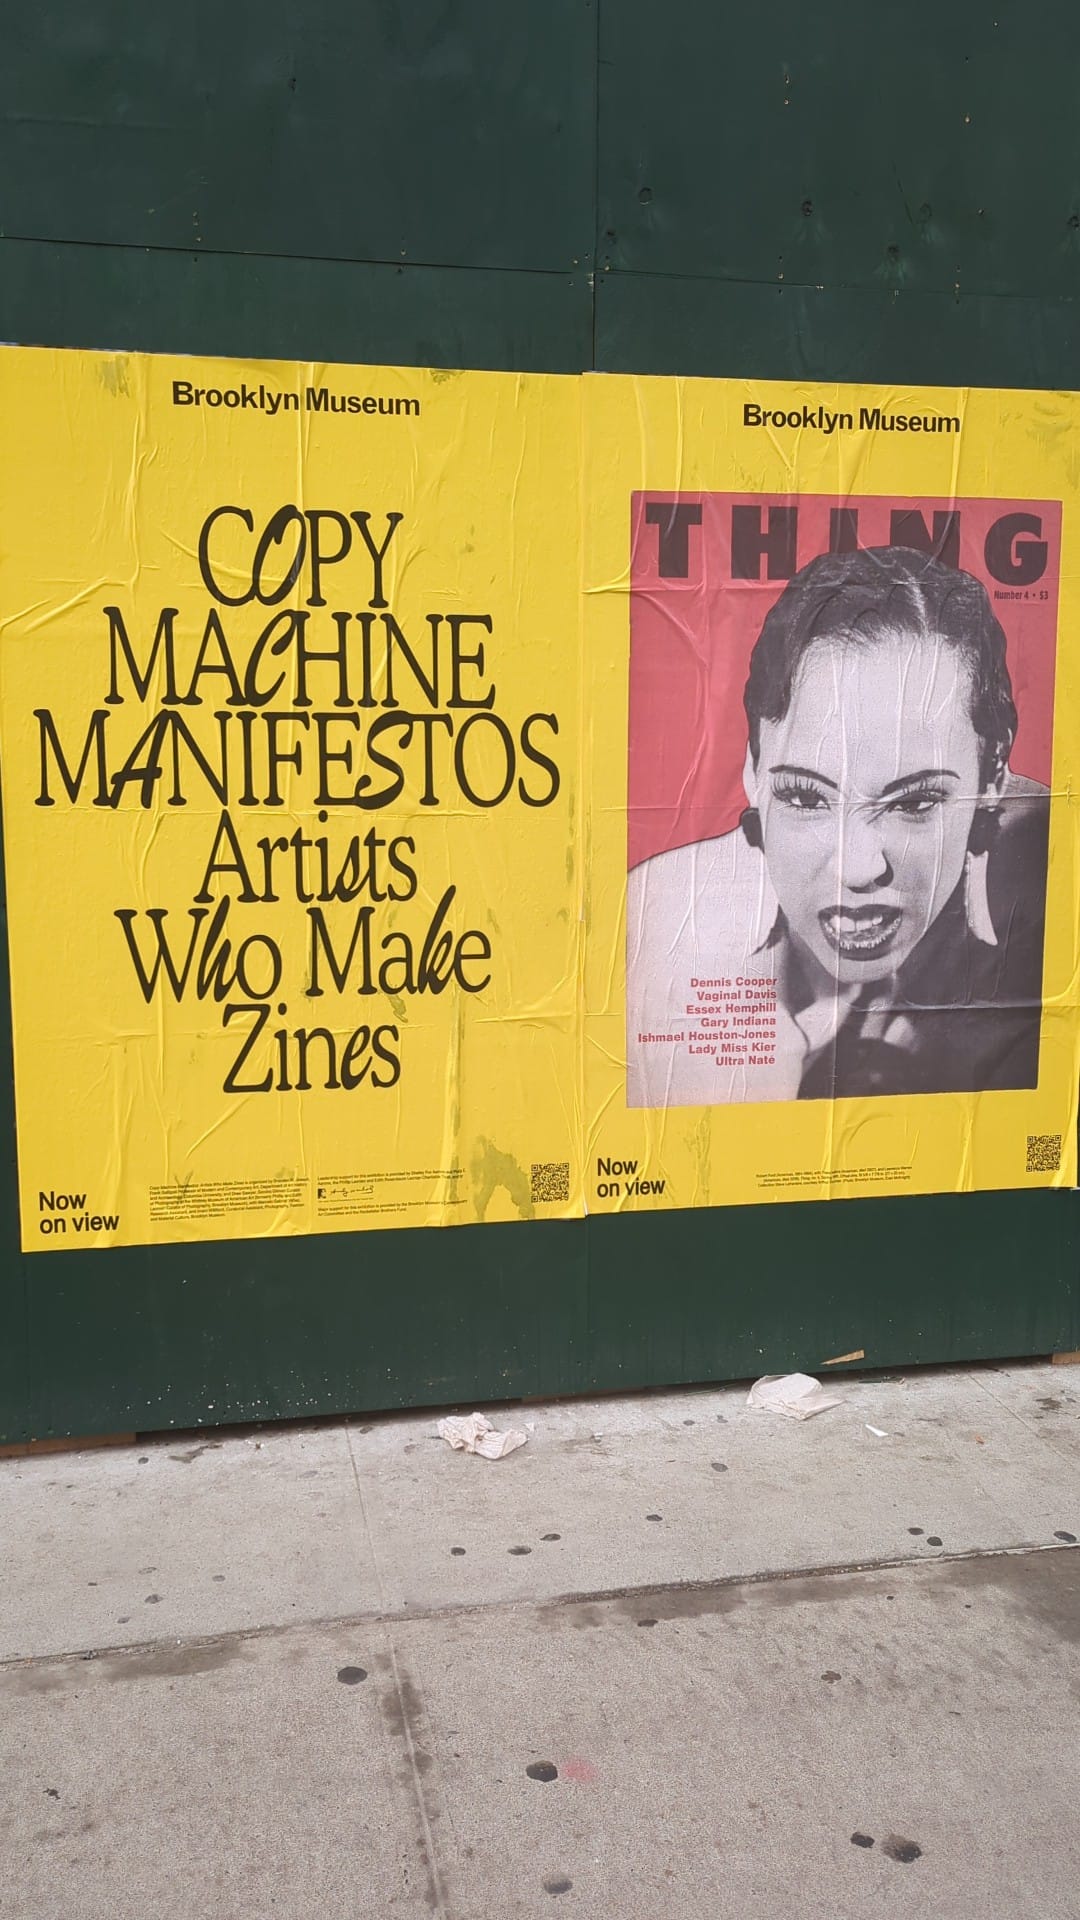 Posters on Atlantic Ave. in NY promoting the Brooklyn Museum exhibit features the cover of Thing Magazine.